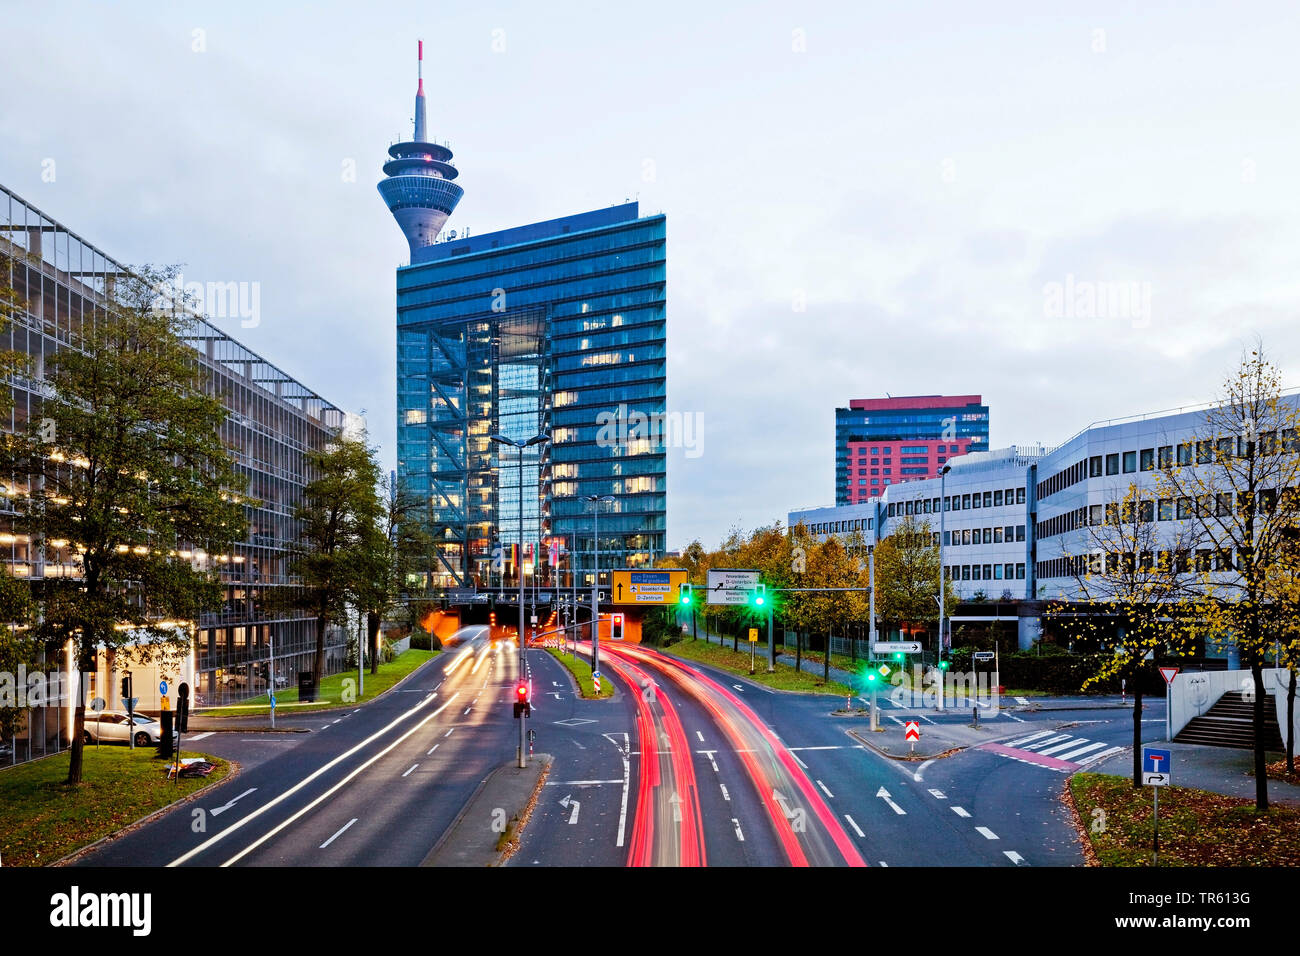 television tower Rheinturm and Stadttor, seat of the Prime ministers of North Rhine-Westphalia, in the evening, Germany, North Rhine-Westphalia, Duesseldorf Stock Photo